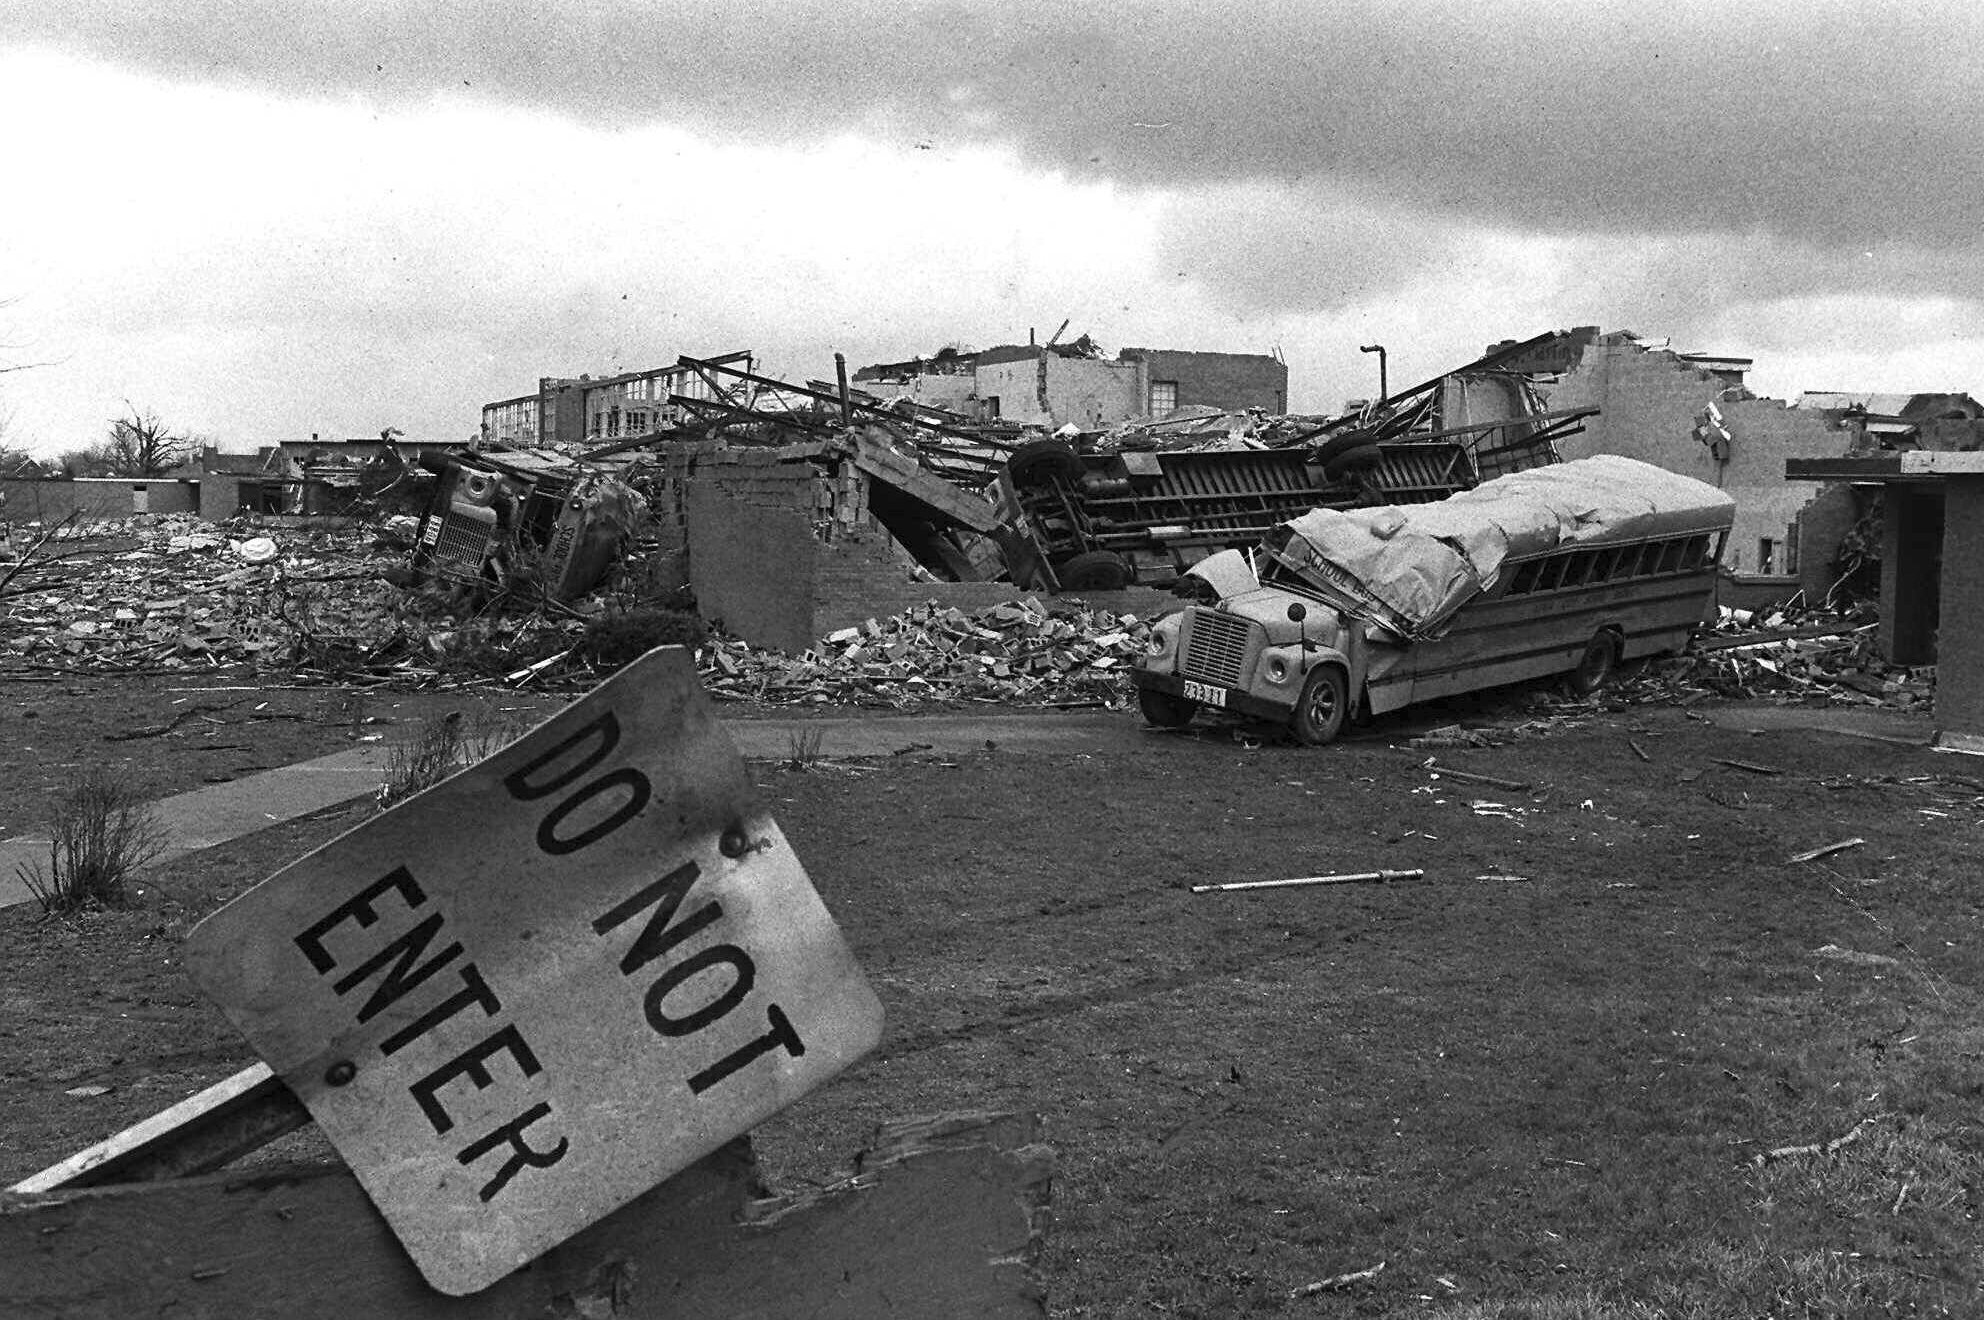 FILE - School buses rest April 5, 1974, on the remains of the high school where they were tossed in Xenia, Ohio, by a tornado that went through the town. The deadly tornado killed 32 people, injured hundreds and leveled half the city of 25,000. Nearby Wilberforce was also hit hard. As the Watergate scandal unfolded in Washington, President Richard Nixon made an unannounced visit to Xenia to tour the damage. Xenia's was the deadliest and most powerful tornado of the 1974 Super Outbreak. (AP Photo, file)